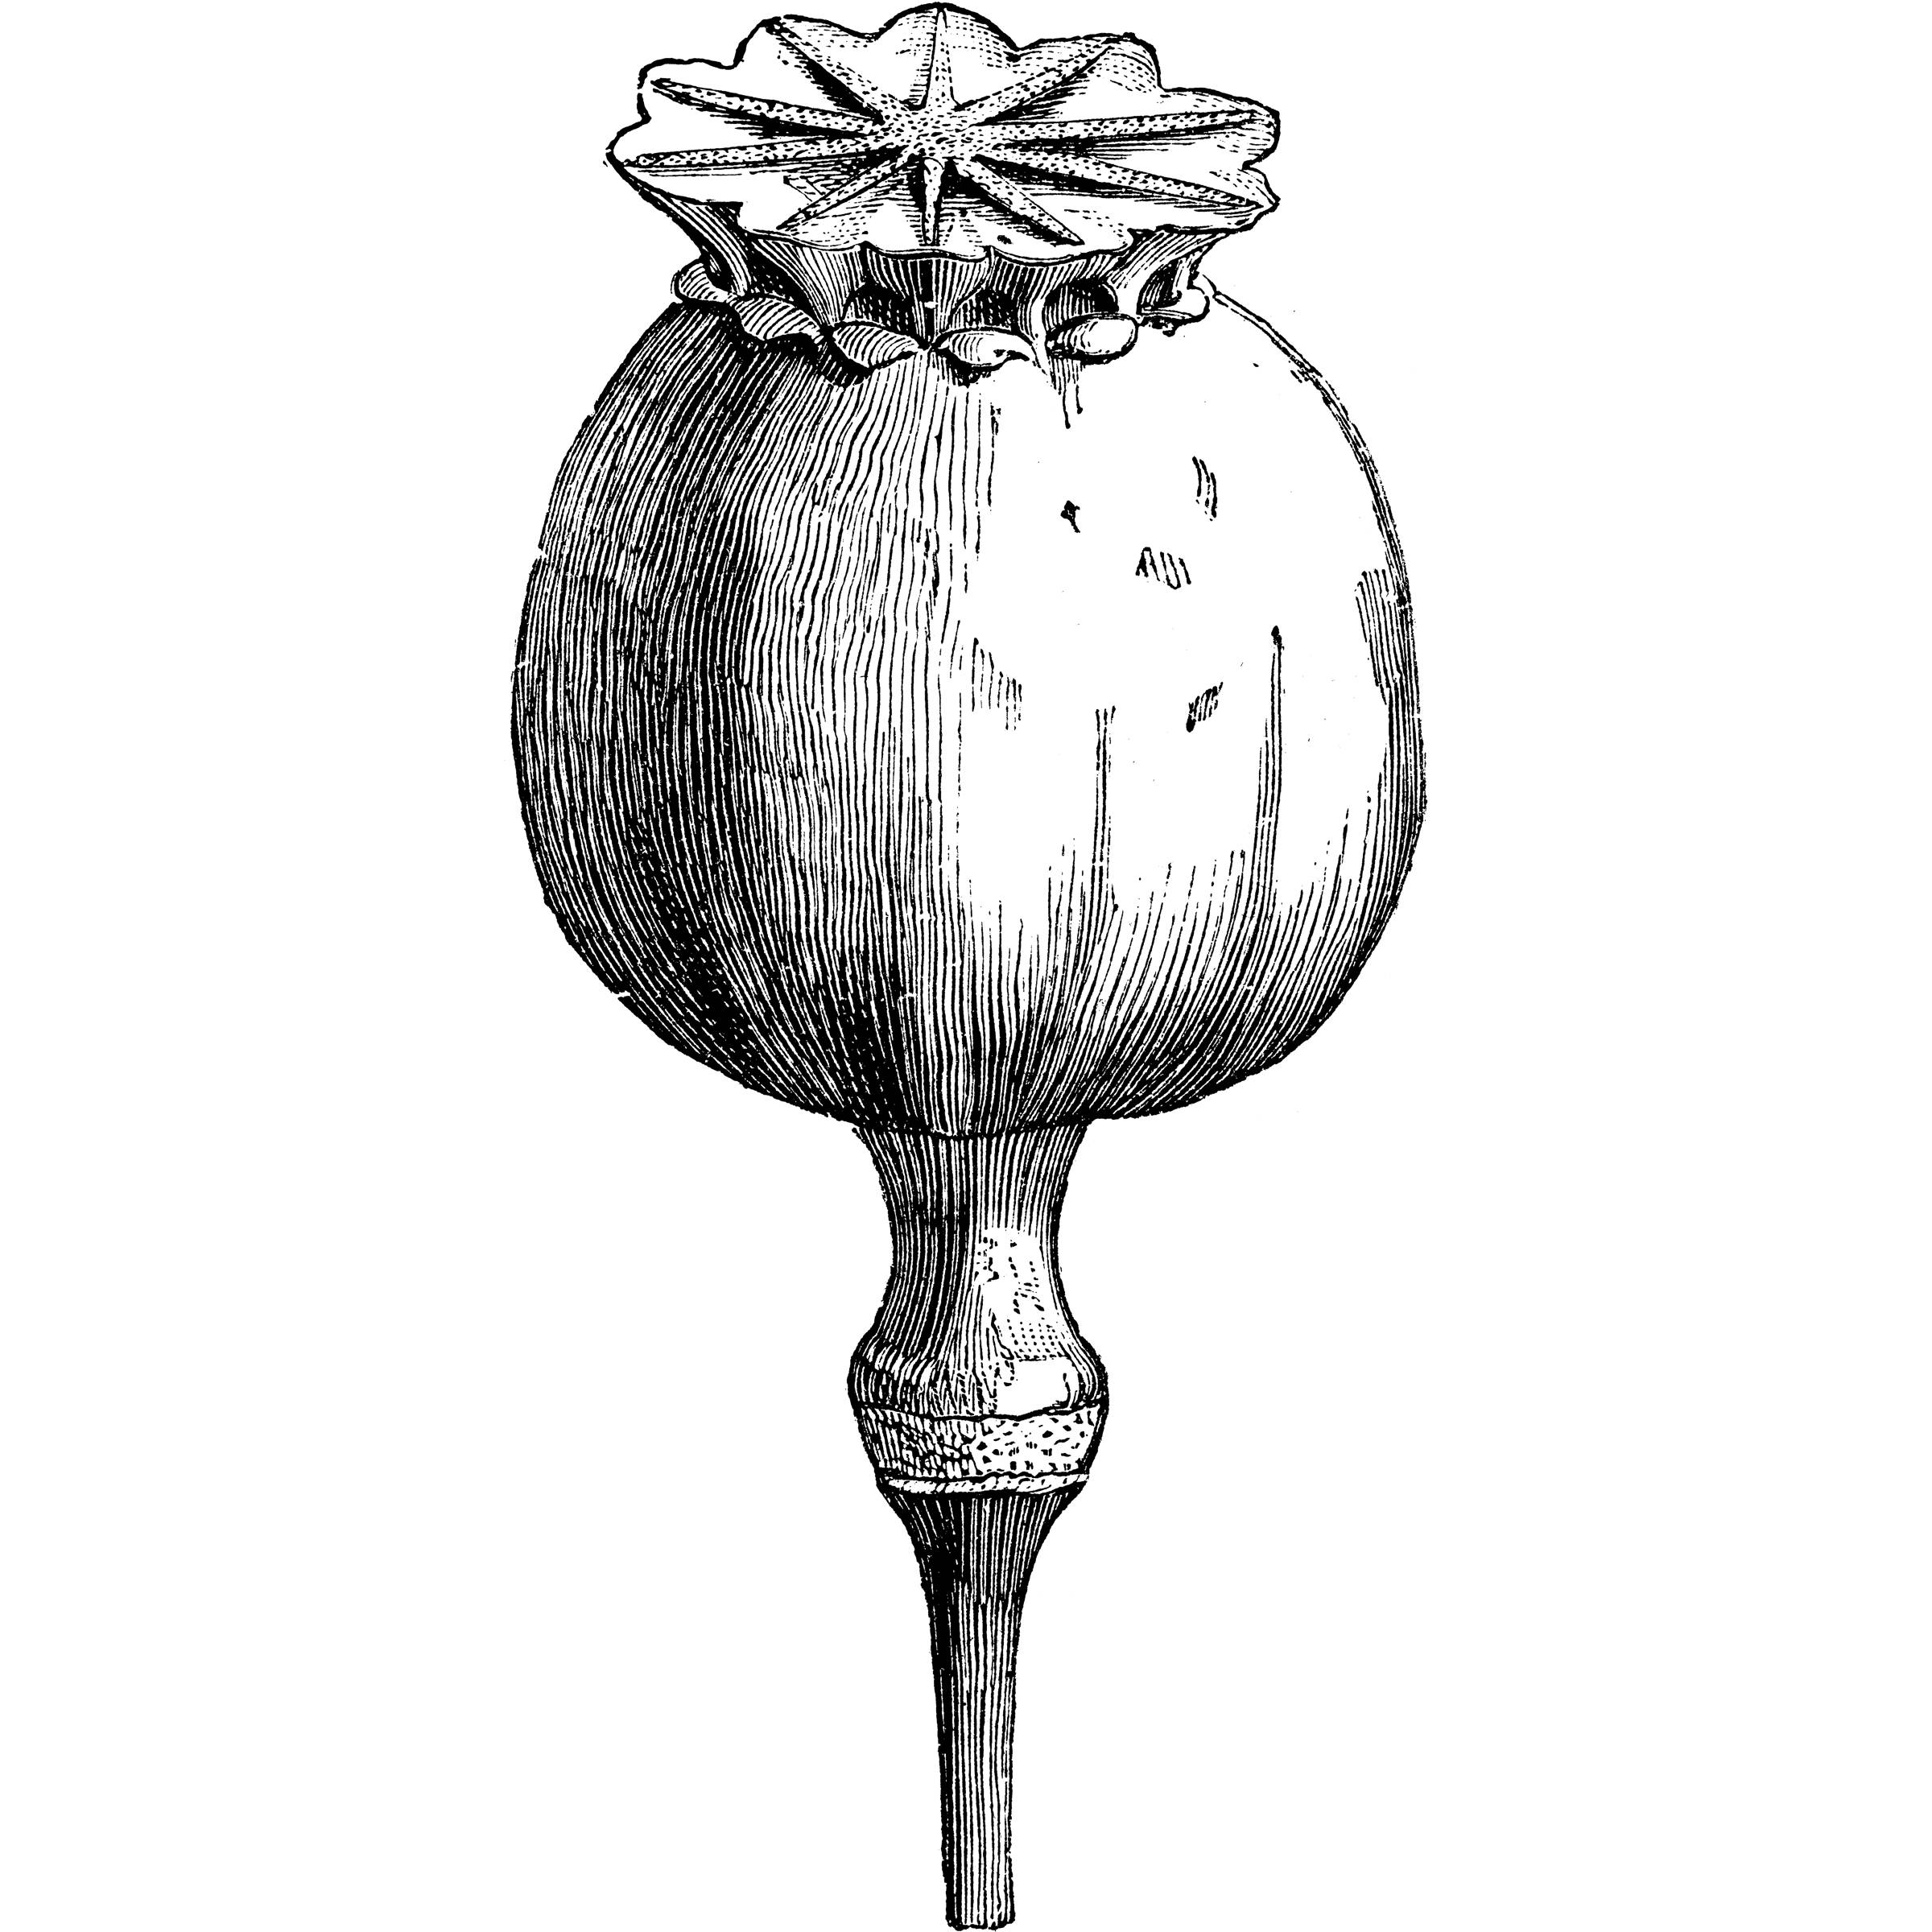 Vintage woodcut style engraving of poppy bud. Source: ilbusca / iStock).